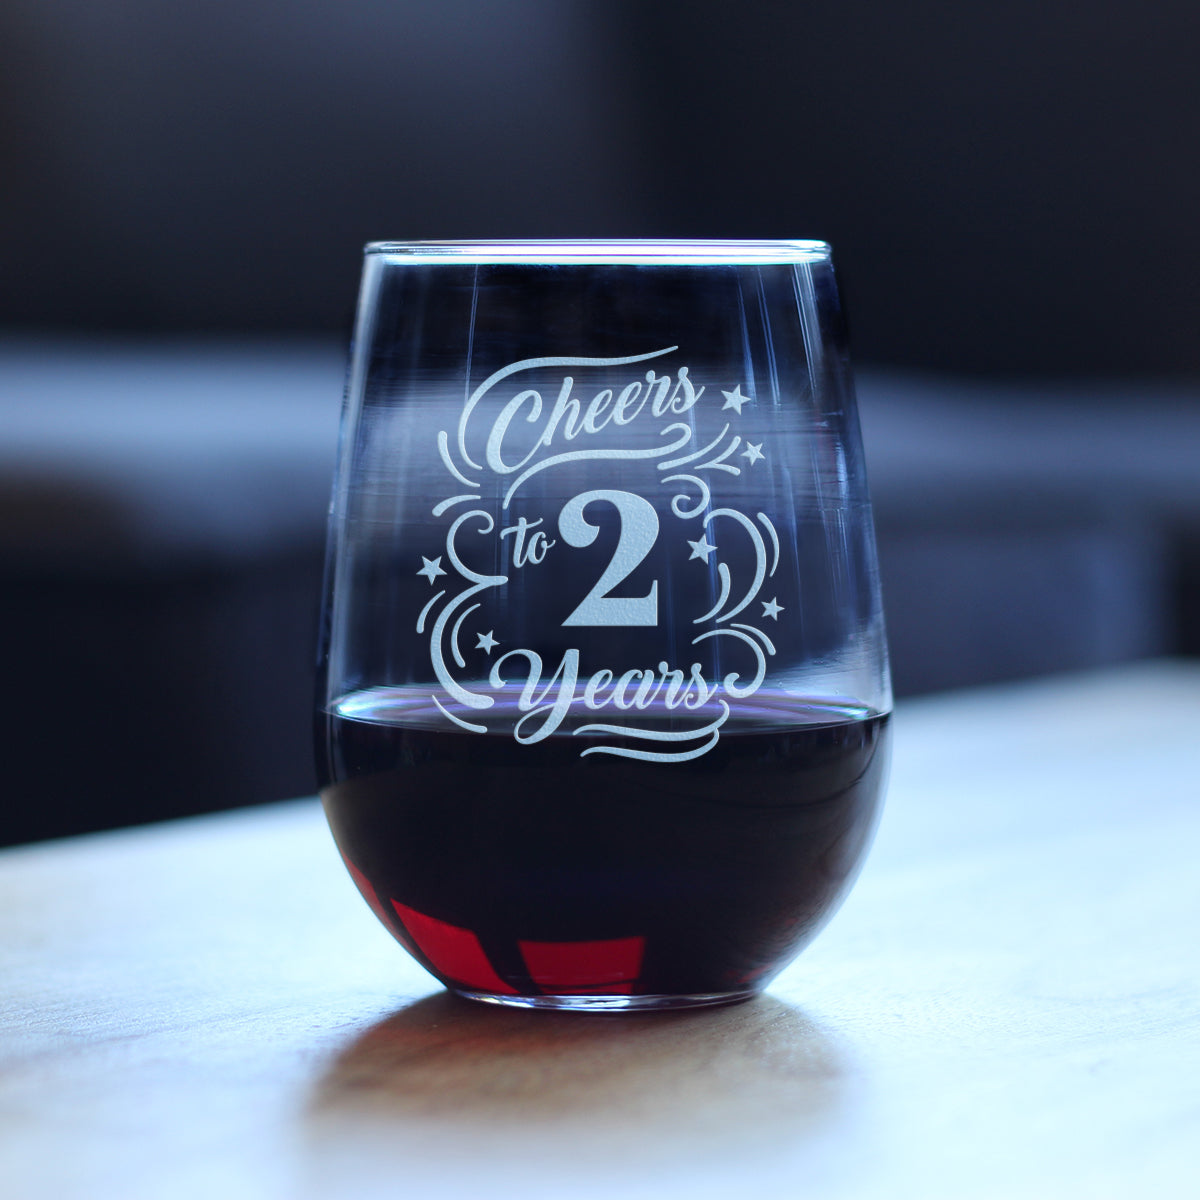 Cheers to 2 Years - Stemless Wine Glass Gifts for Women &amp; Men - 2nd Anniversary Party Decor - Large 17 Oz Glasses